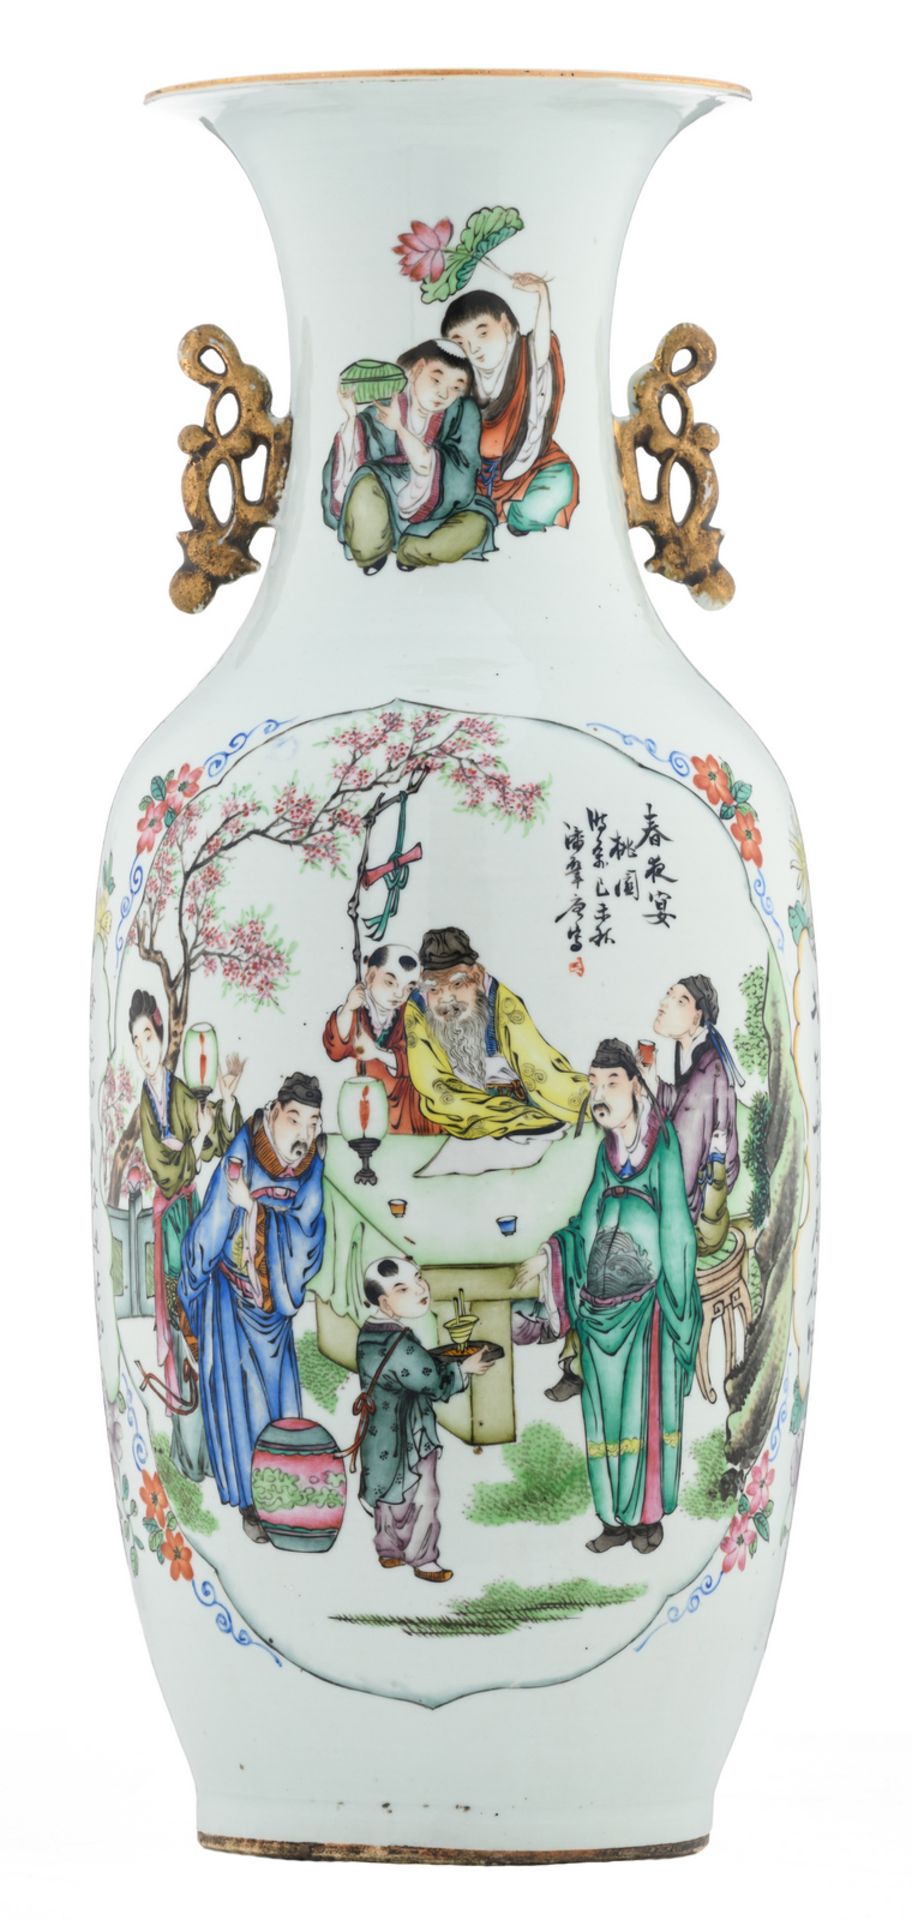 A Chinese famille rose vase, one side decorated with an animated scene, the other side with a bird